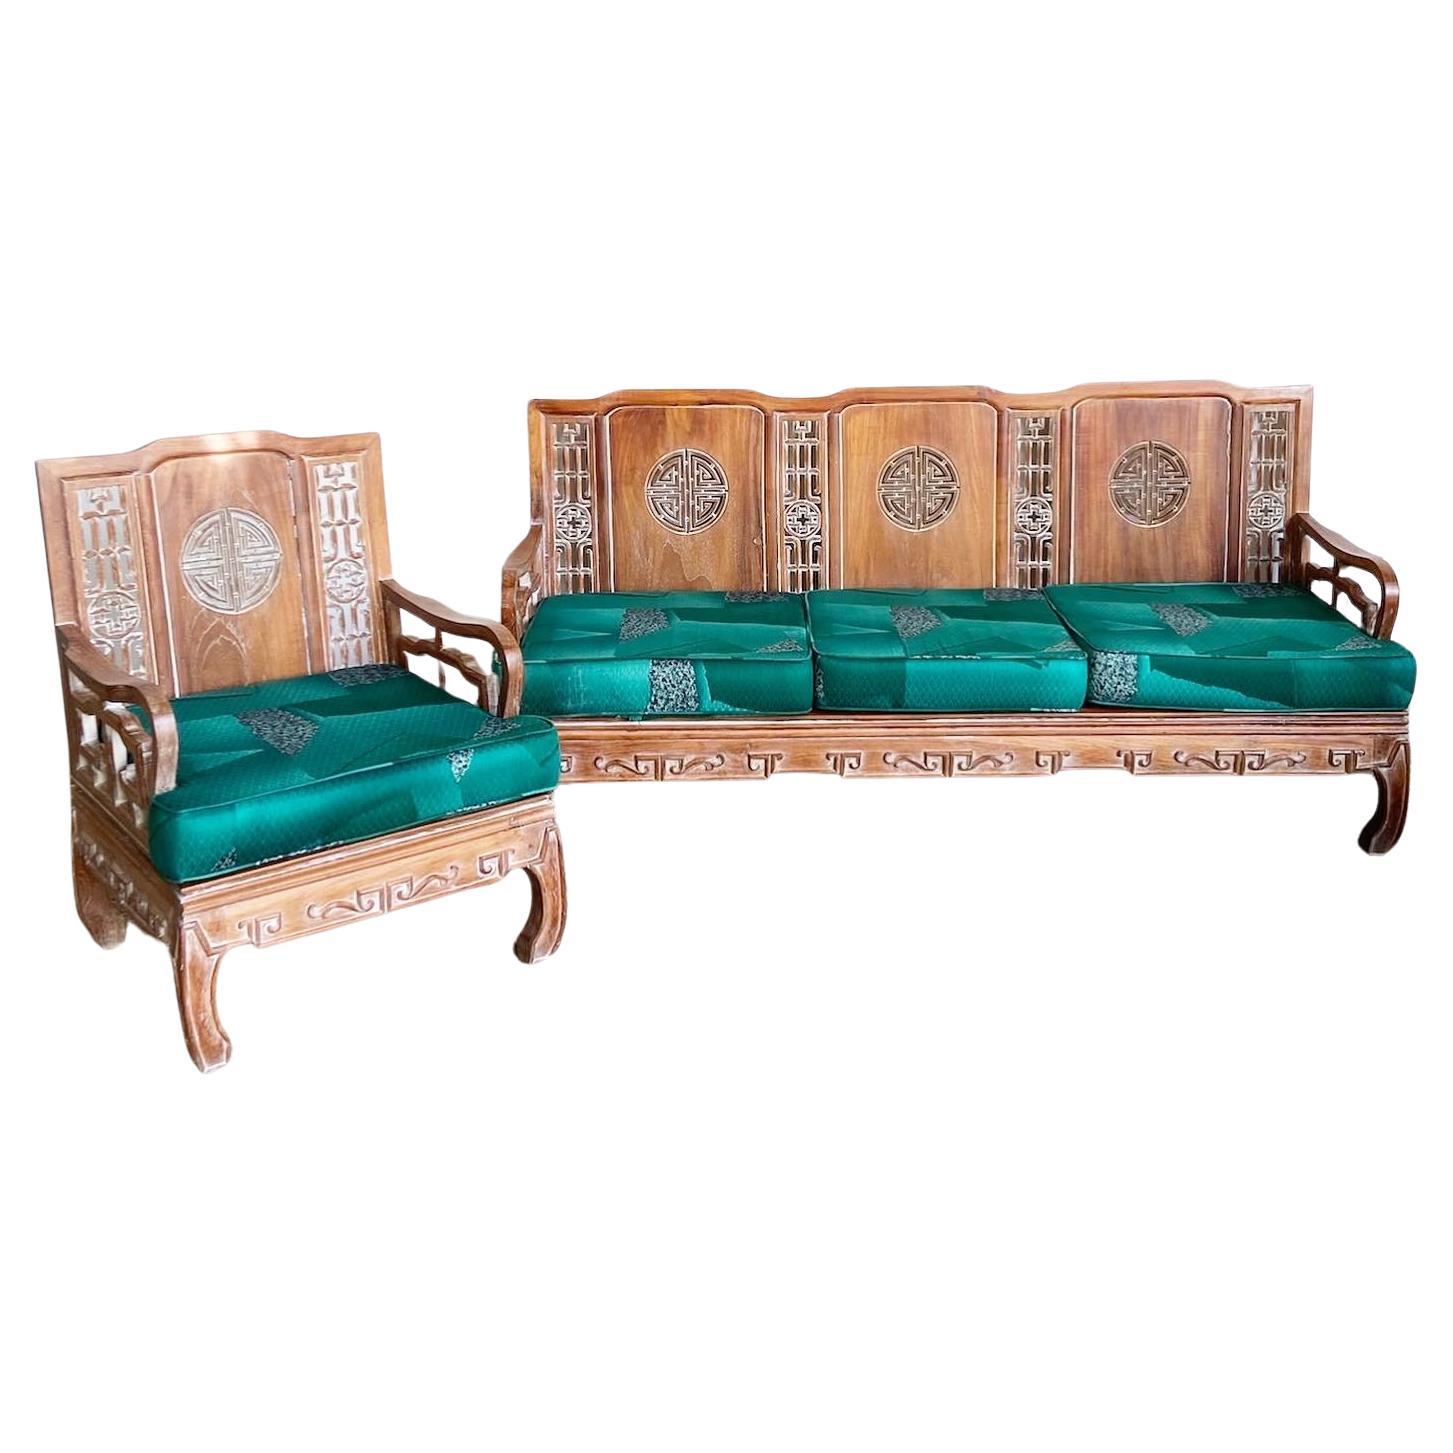 Ming Style Carved Wooden Sofa/Bench With Arm Chair For Sale